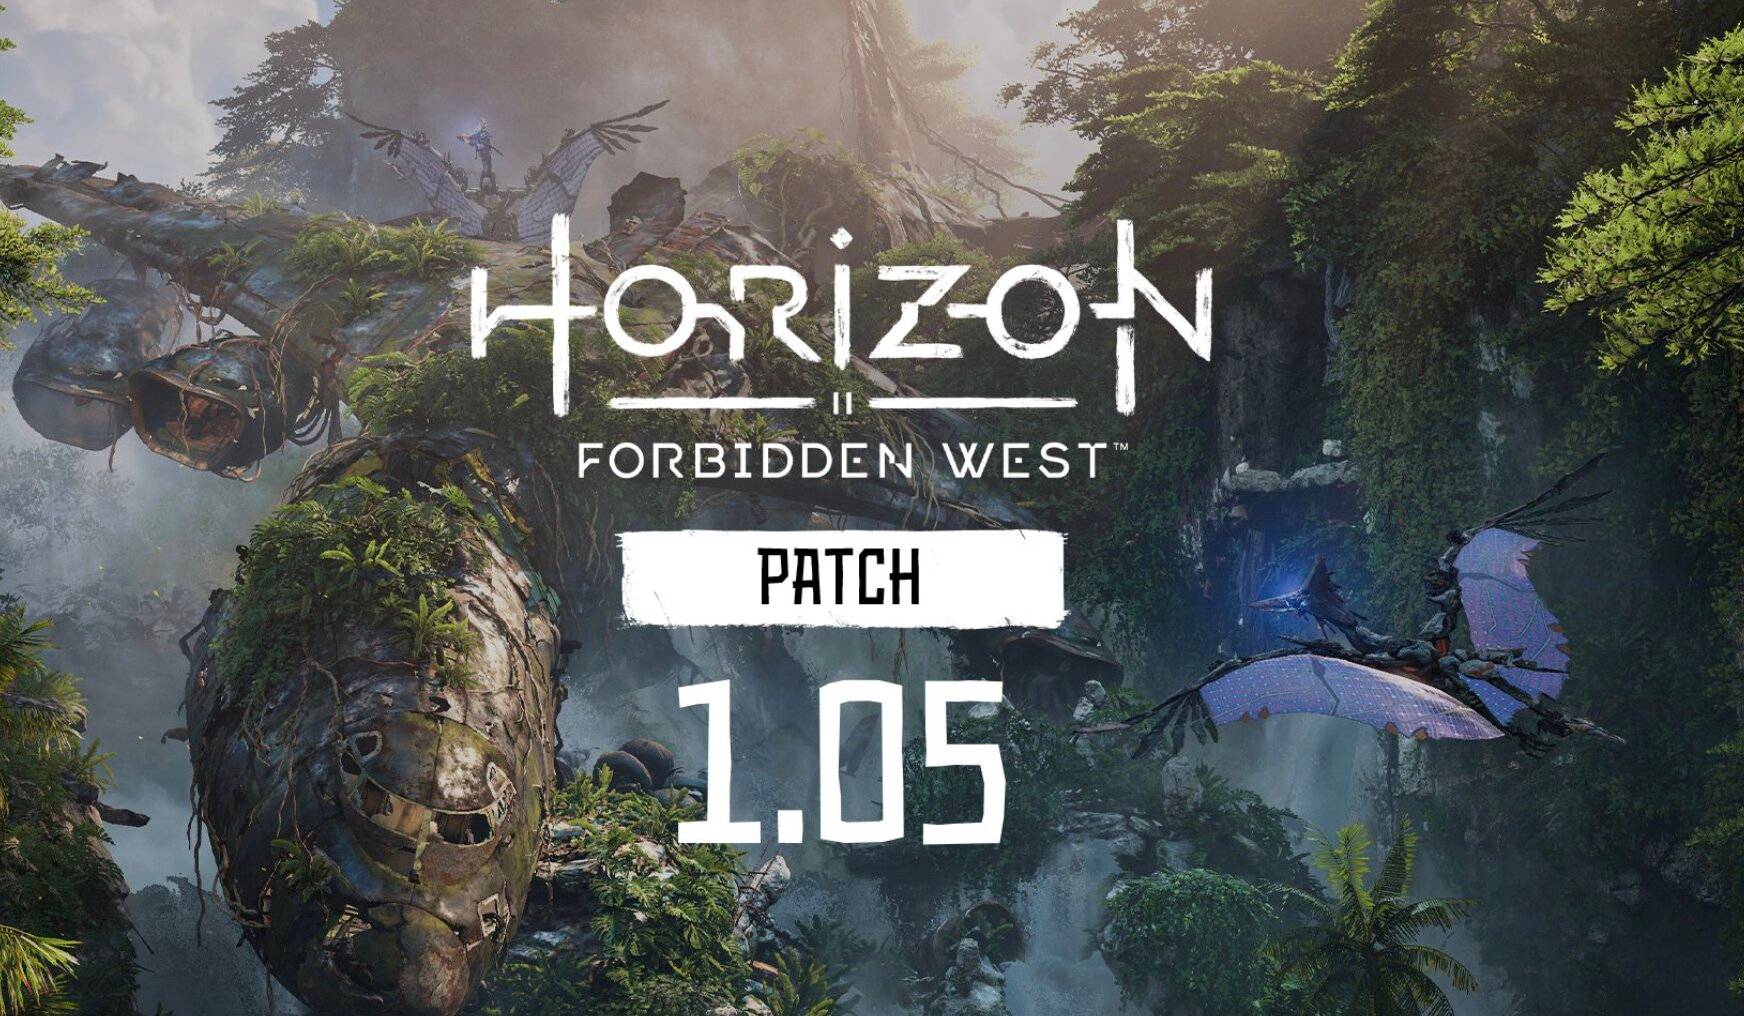 Horizon Forbidden West Patch Notes 1.05 Released